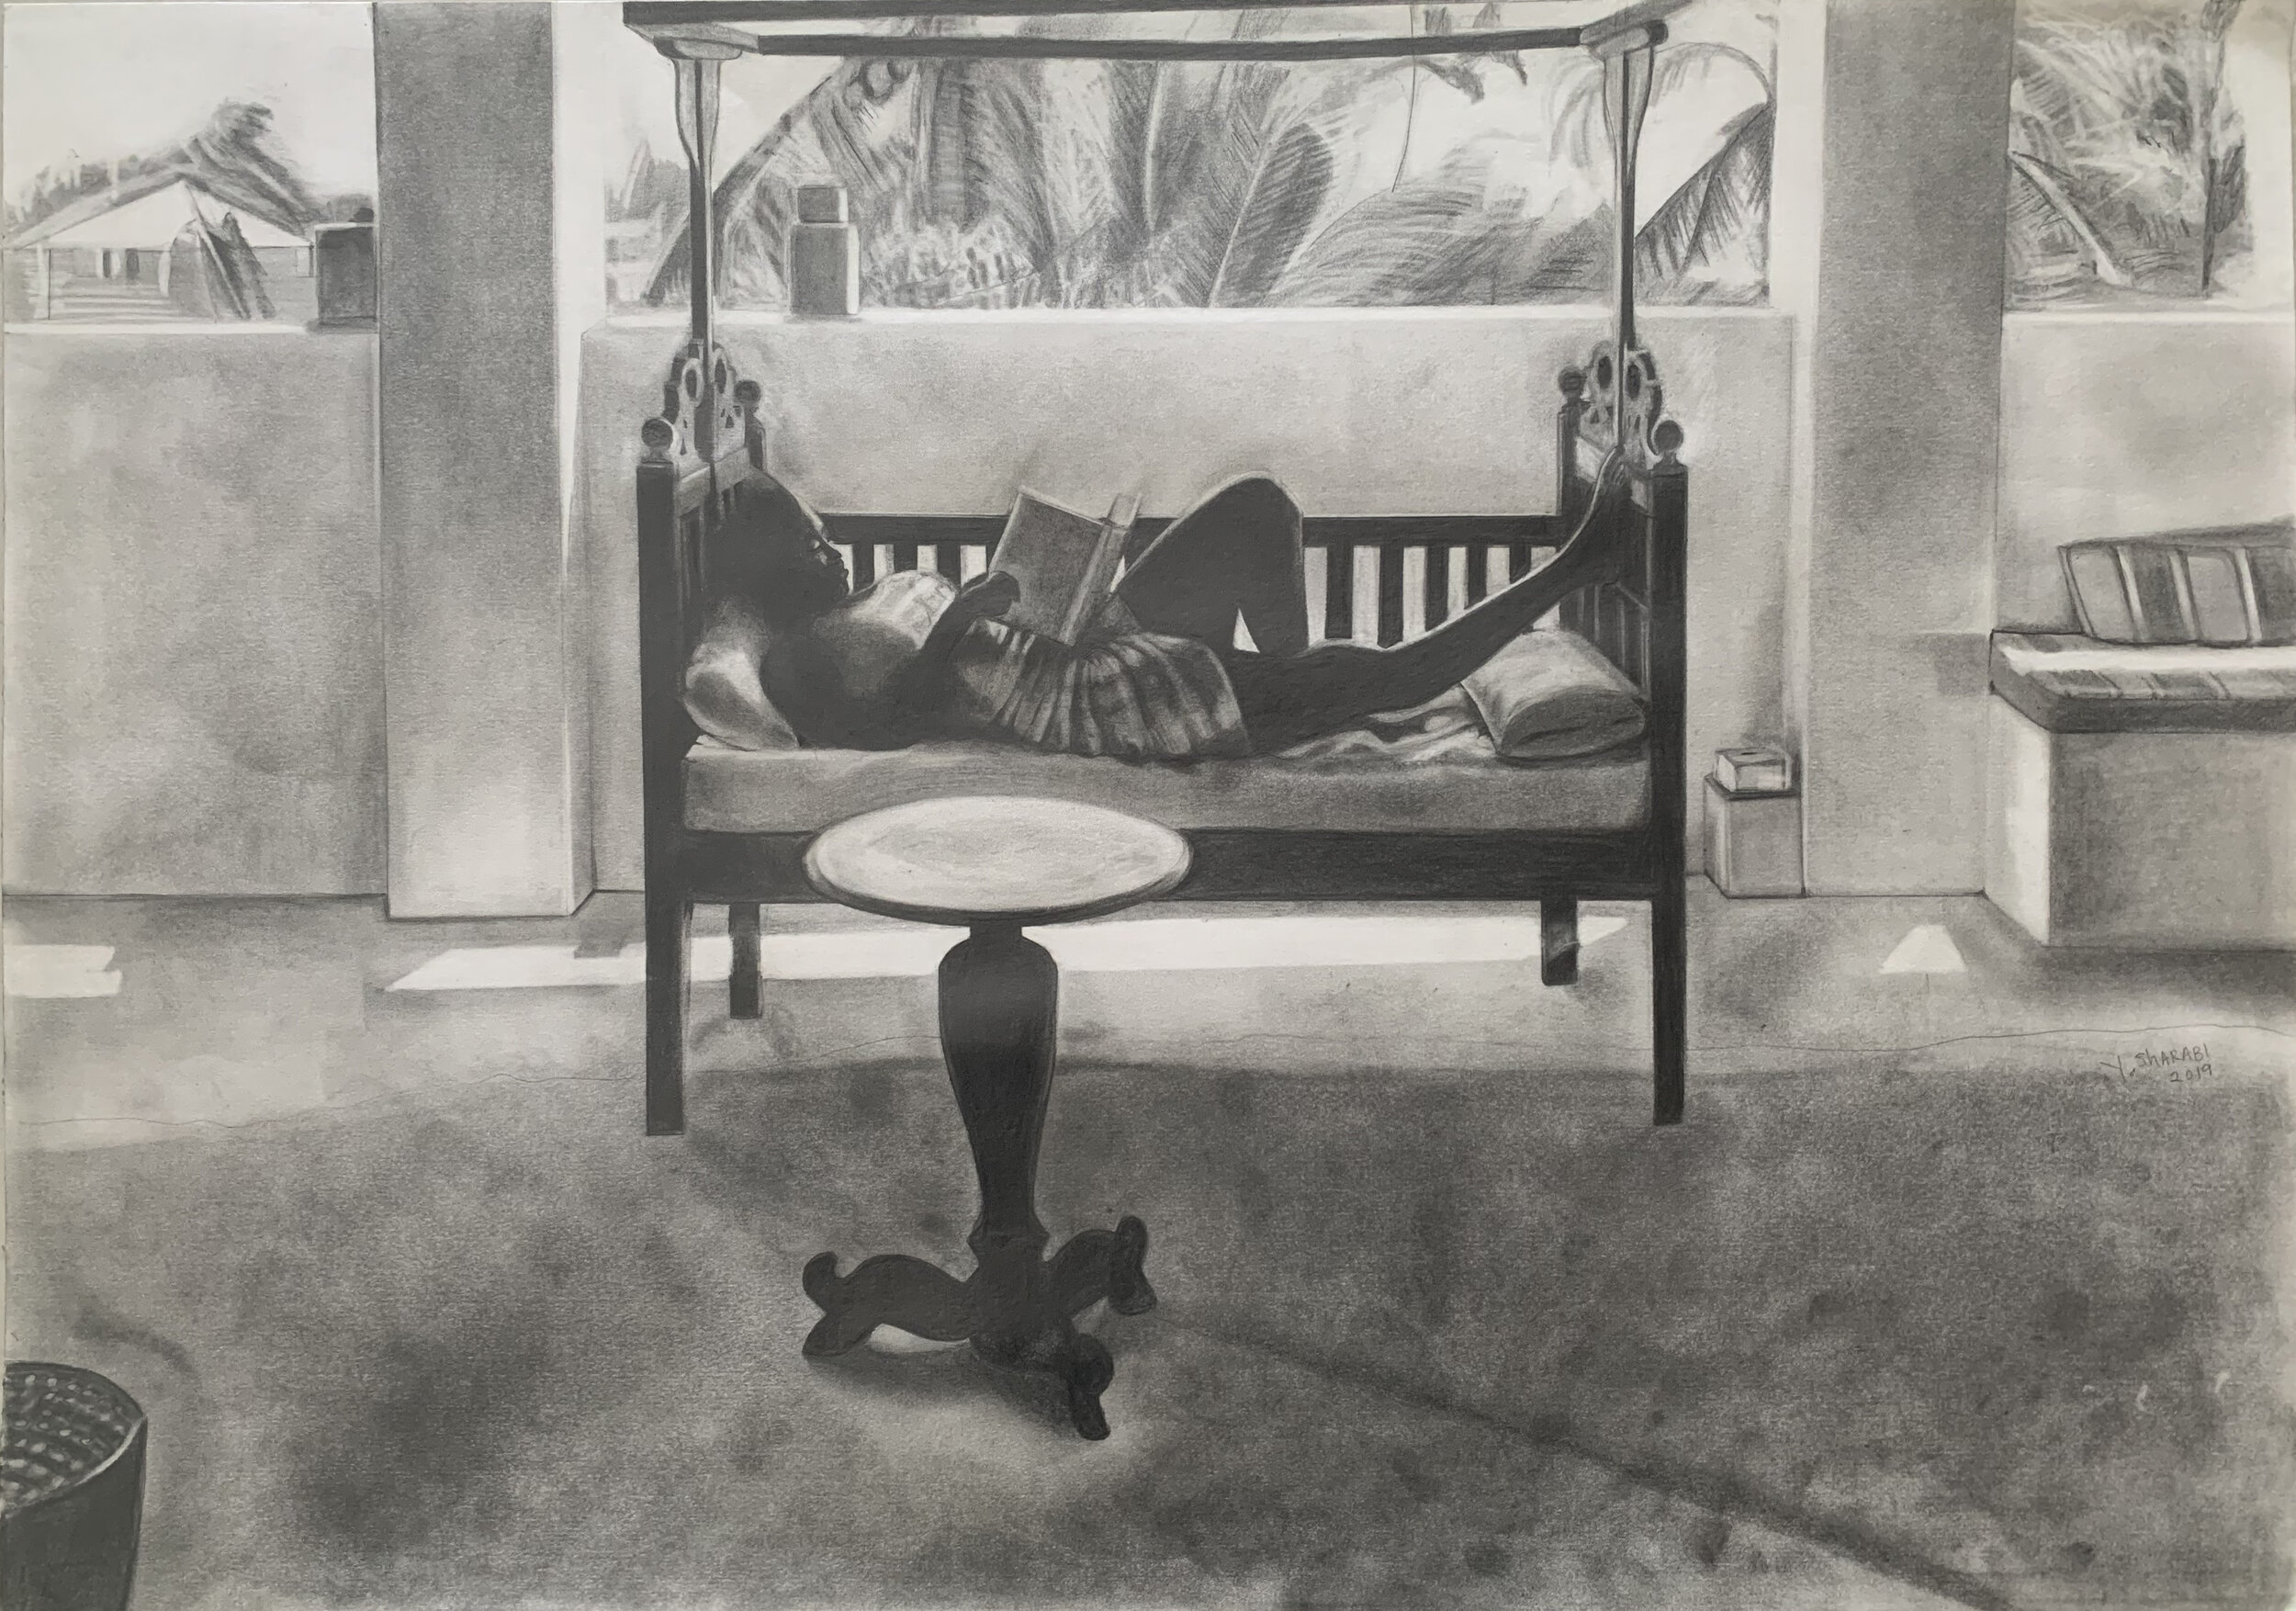 Yasmin Sharabi, Miriam at the Factory, 2018, Pencil and Graphite on paper, 42.5 x 59 cm